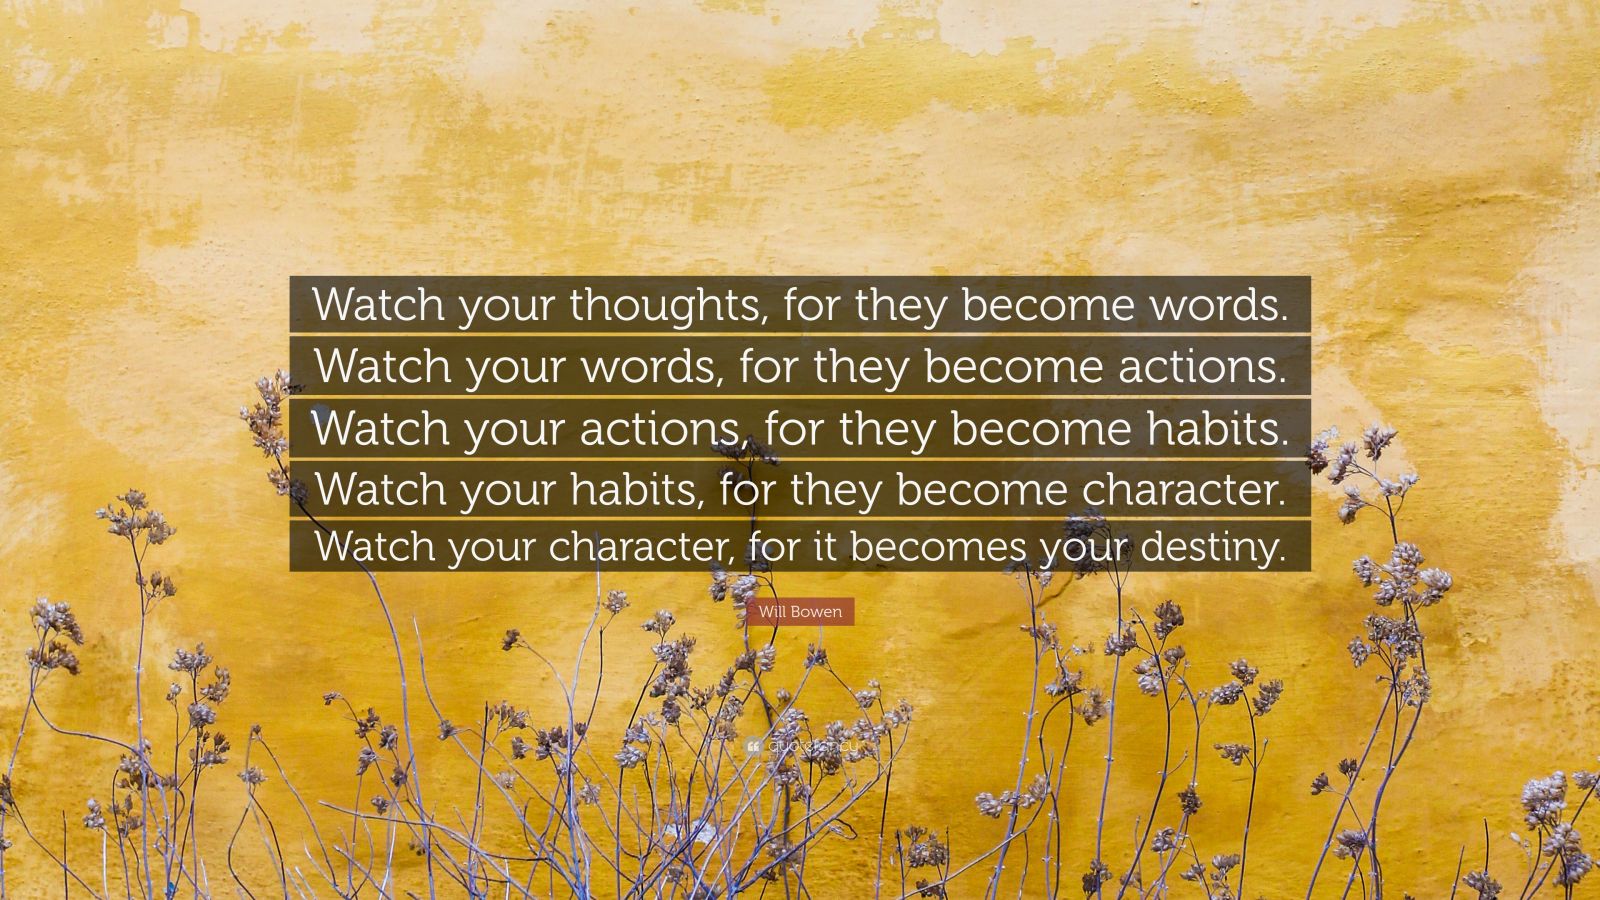 Watch your thoughts, words, actions and character - Quote in pics